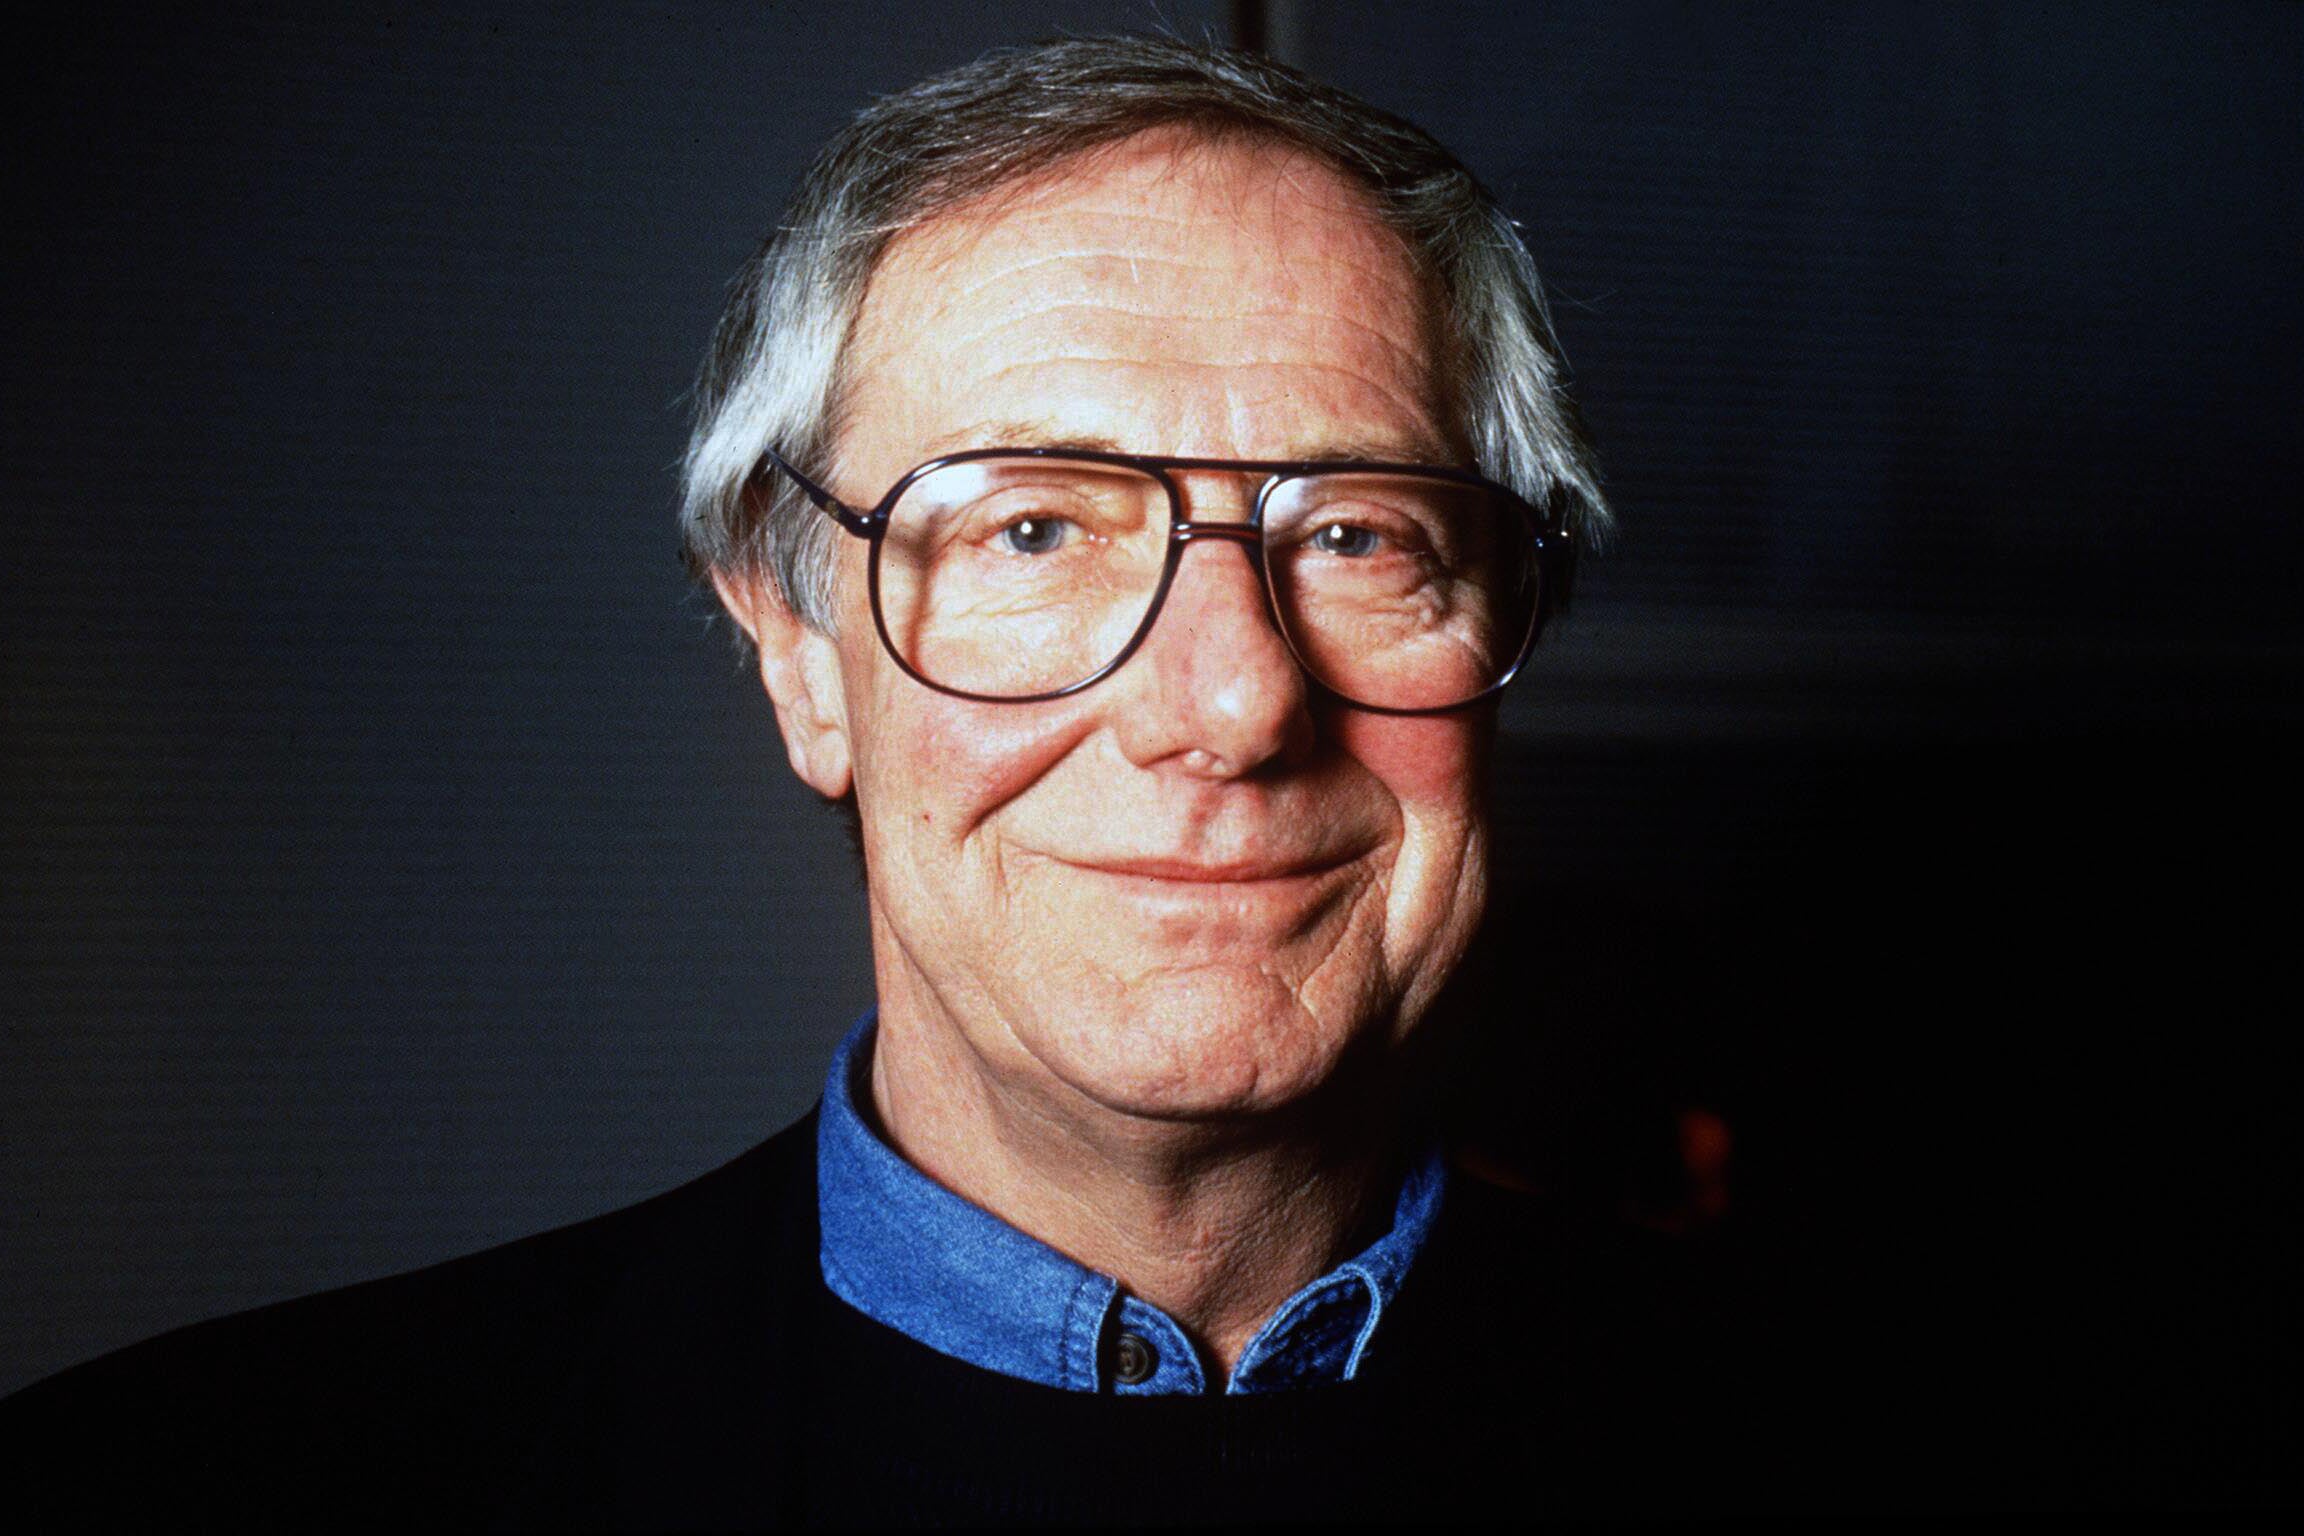 Norman received the Richard Dimbleby Award in 1981 and was made CBE in 1998